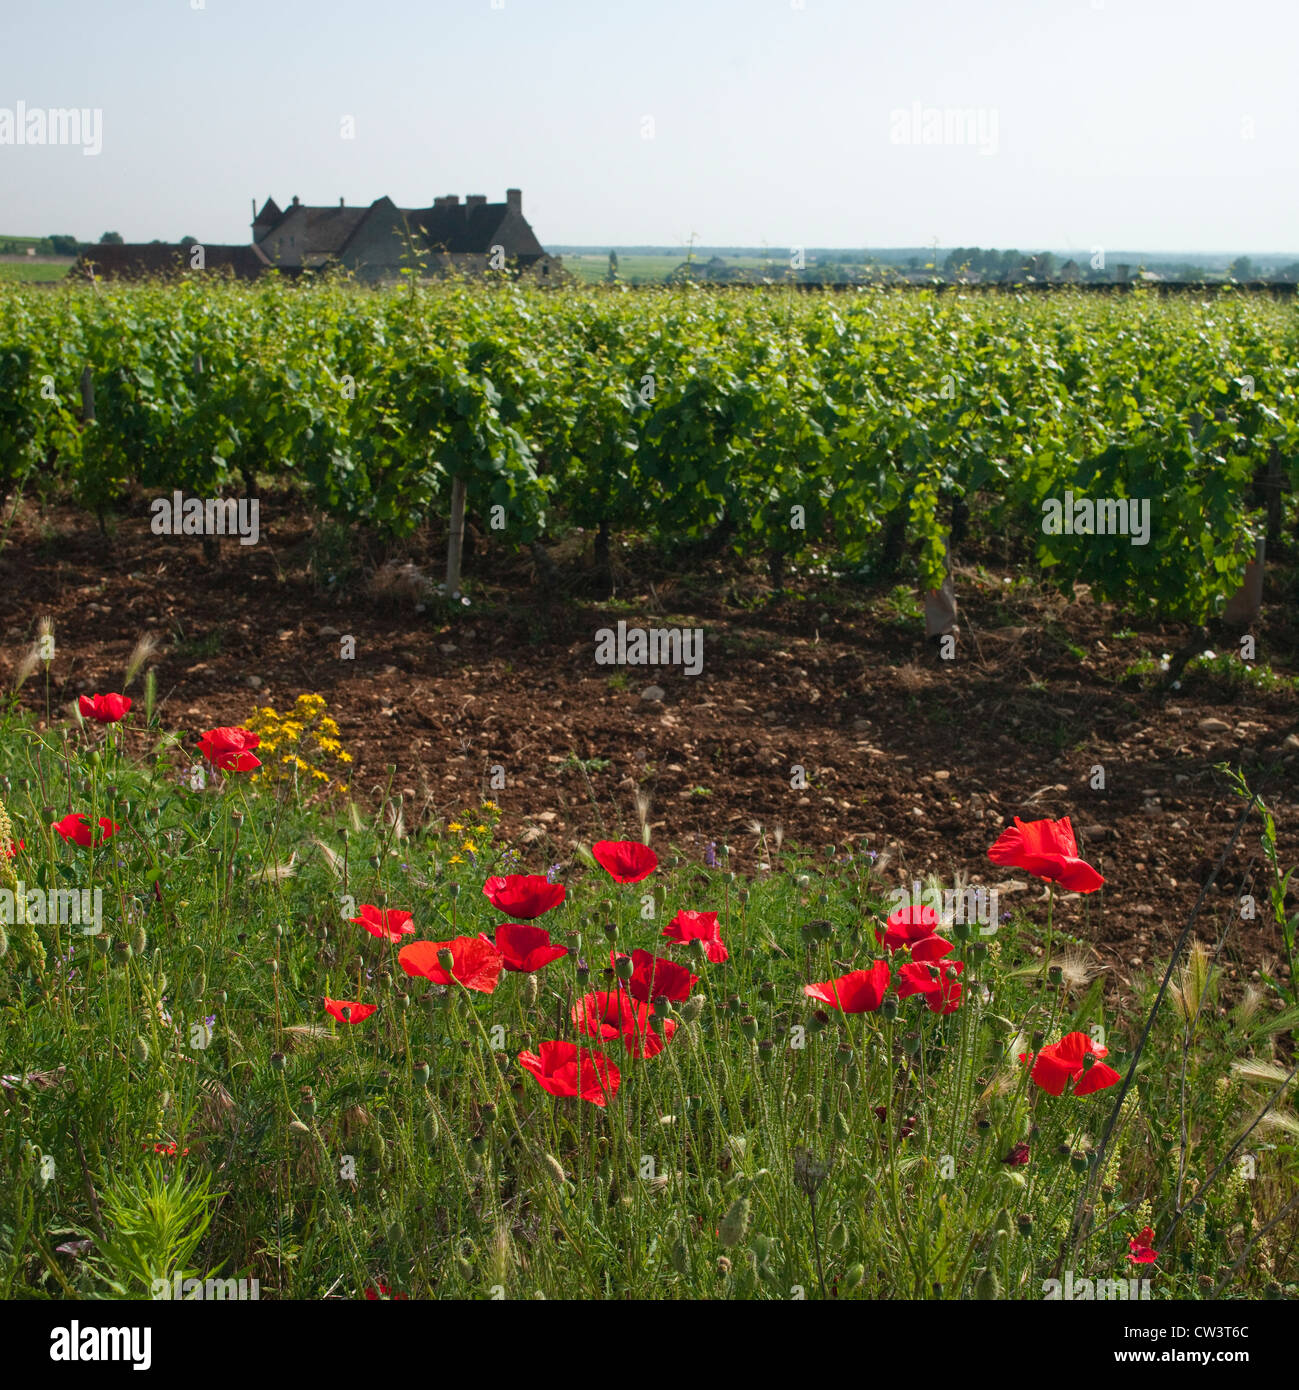 Red poppies growing alongside Pinot Noir vines at Chateau Clos de Vougeot in Burgundy, France Stock Photo